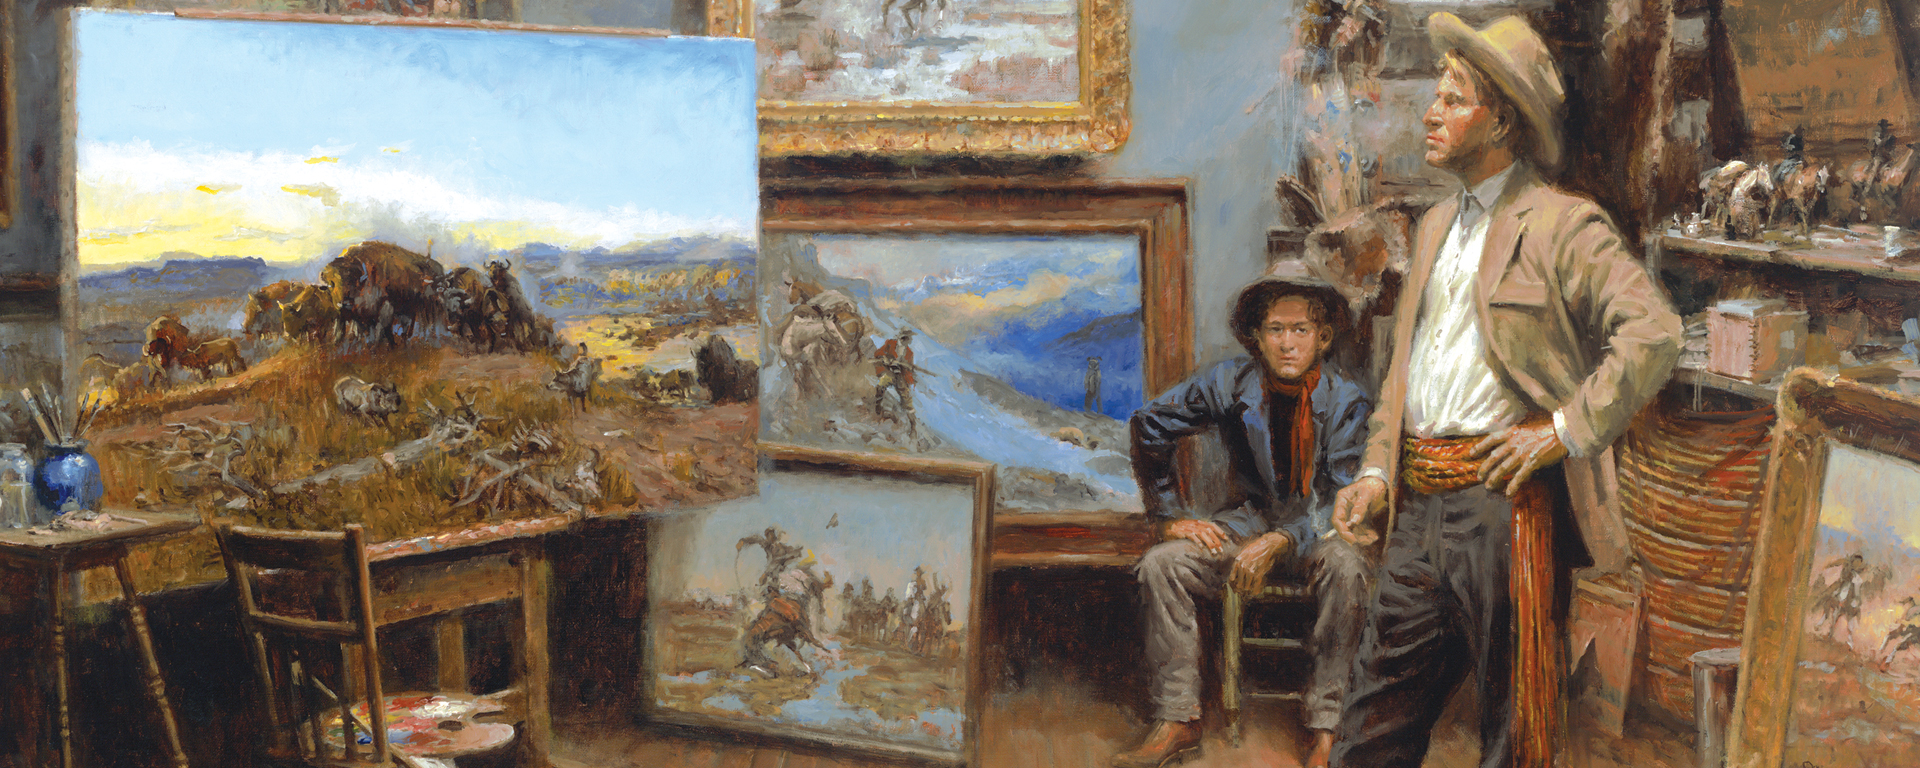 two cowboys looking at collection paintings of western scenes in artist studio